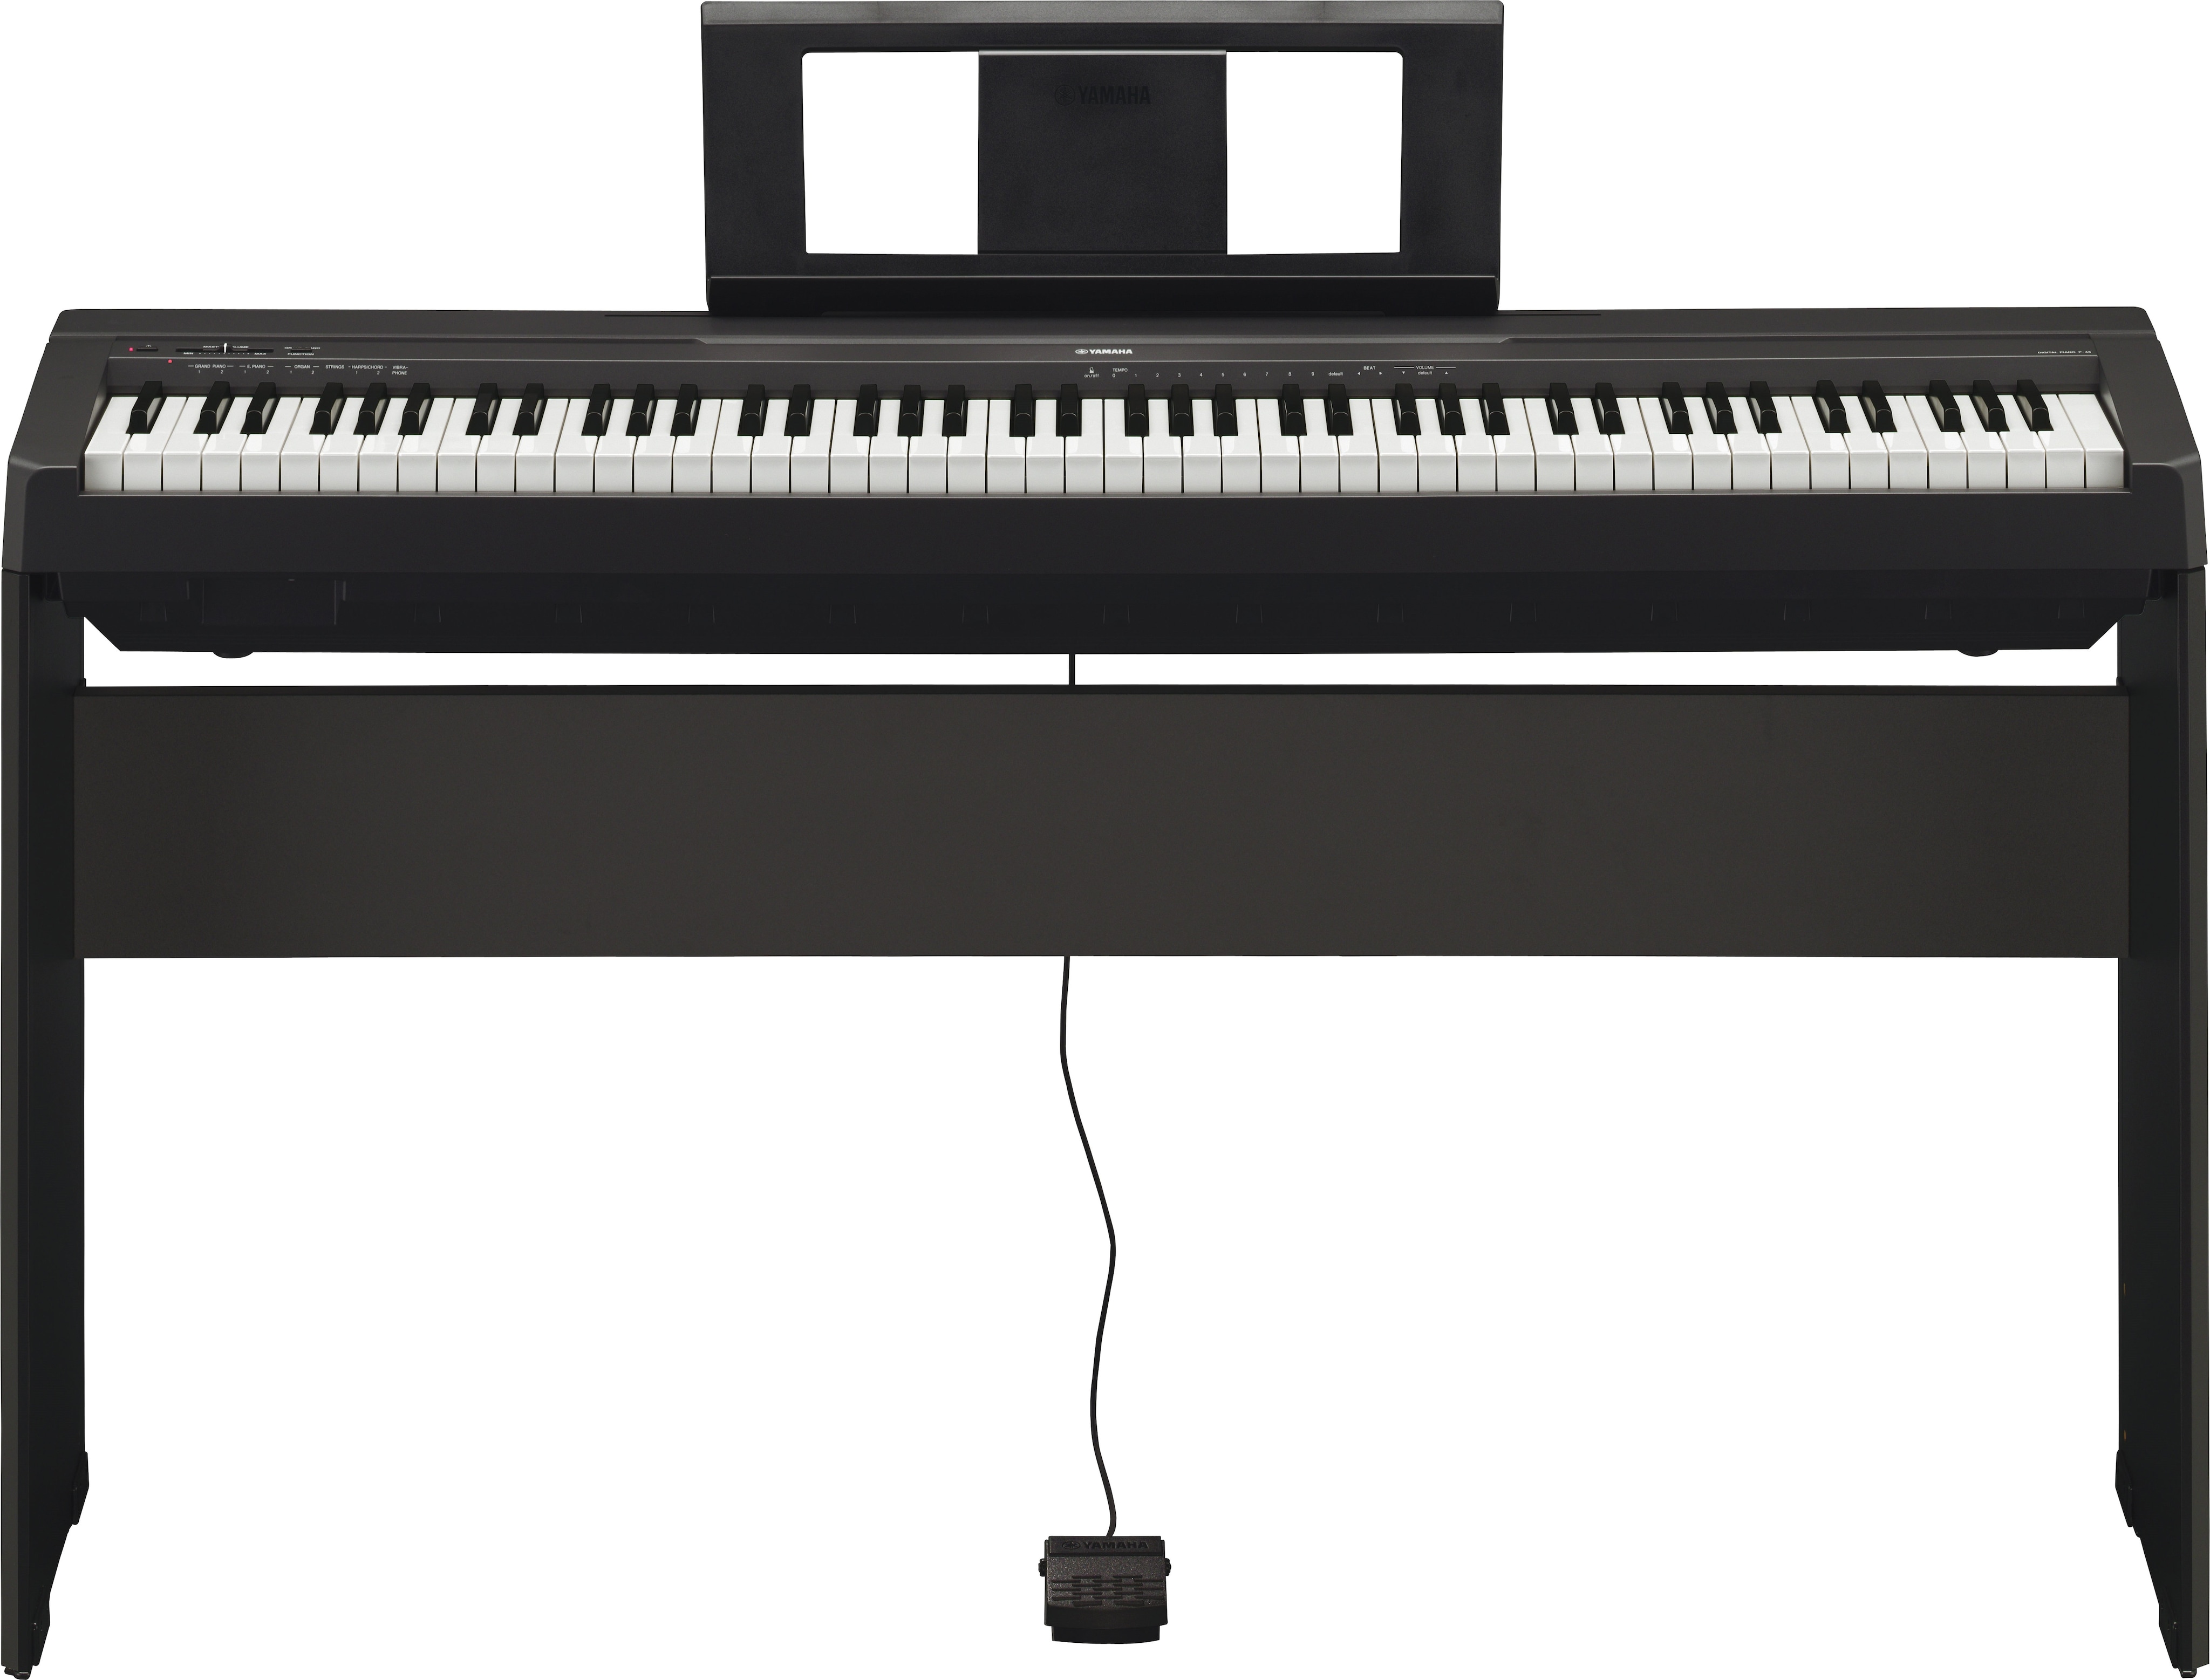 P-45 - Overview - P Series - Pianos - Musical Instruments 